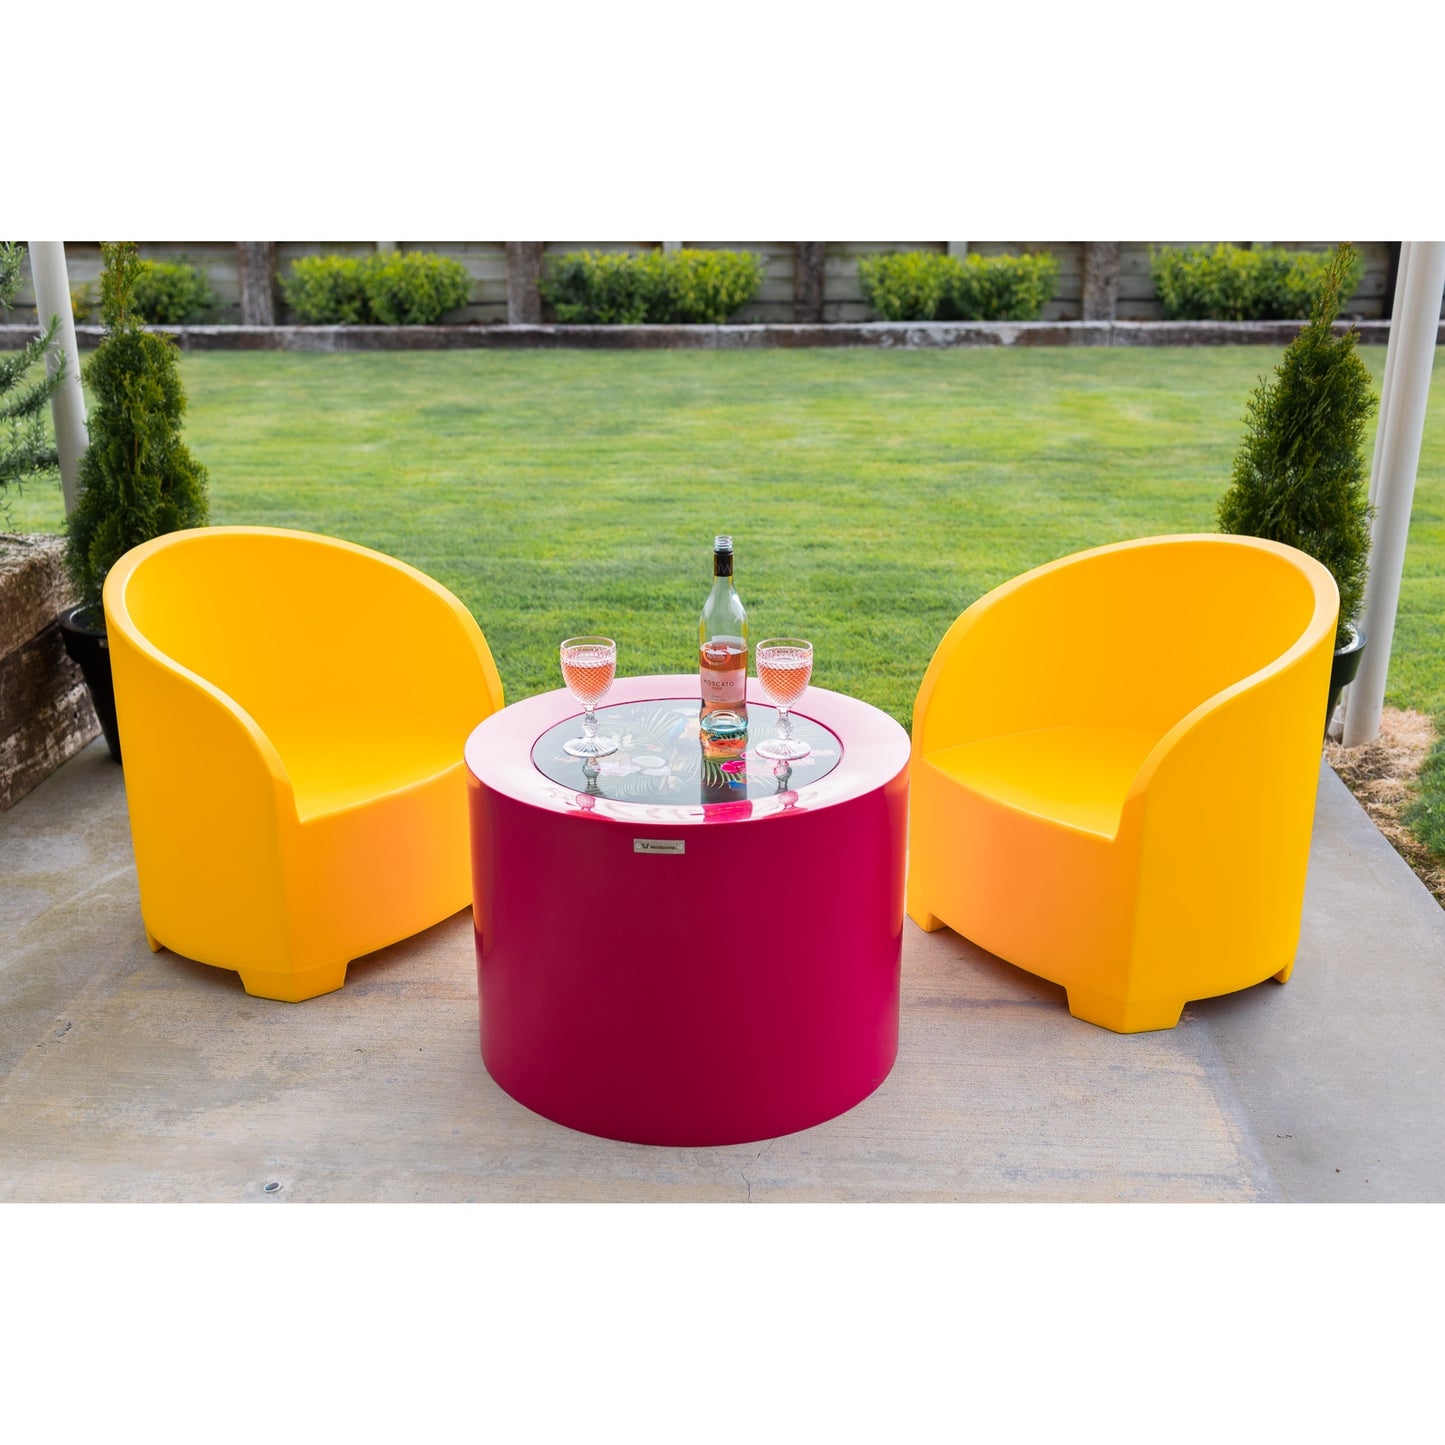 Two yellow chairs and a pink outdoor table on a concrete patio area.